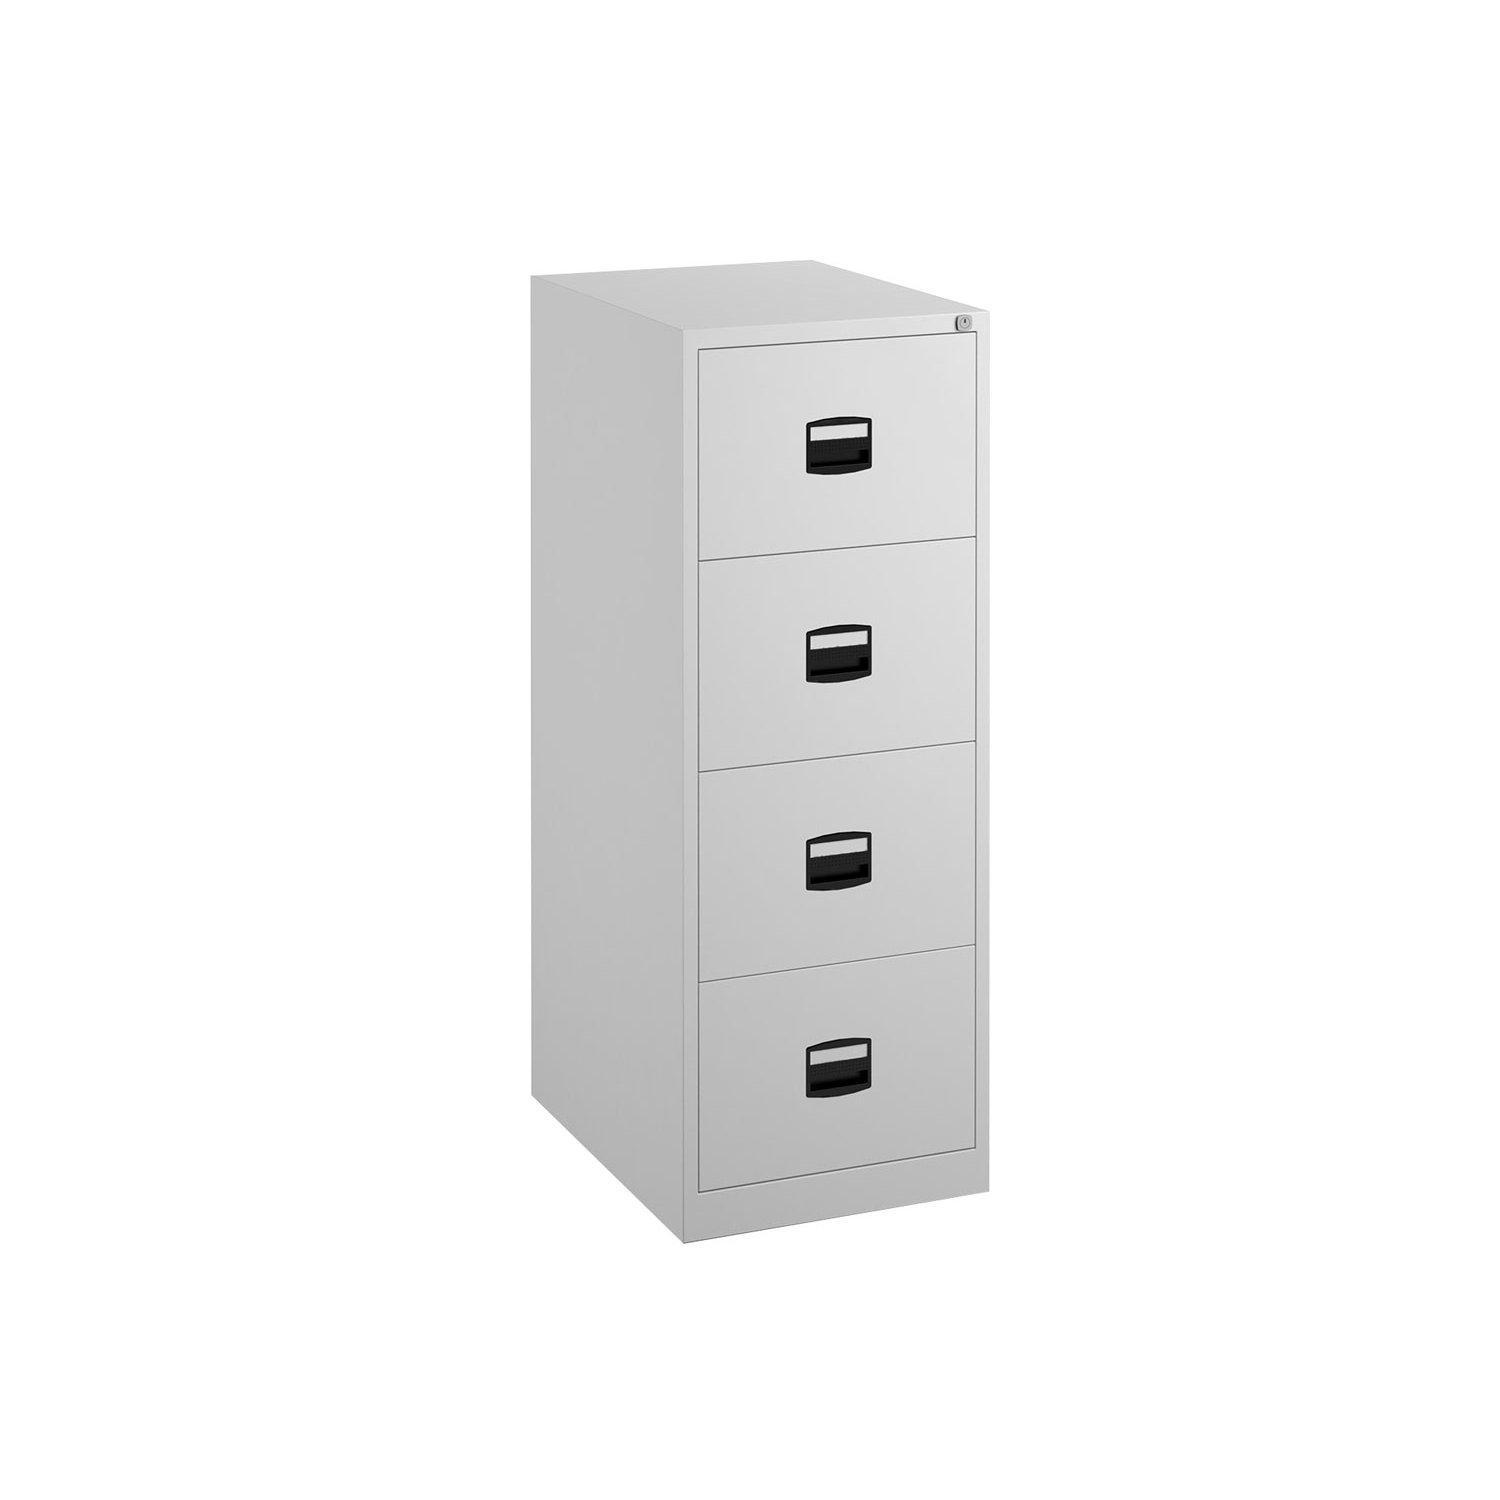 Bisley Economy Filing Cabinet (Central Handle), White